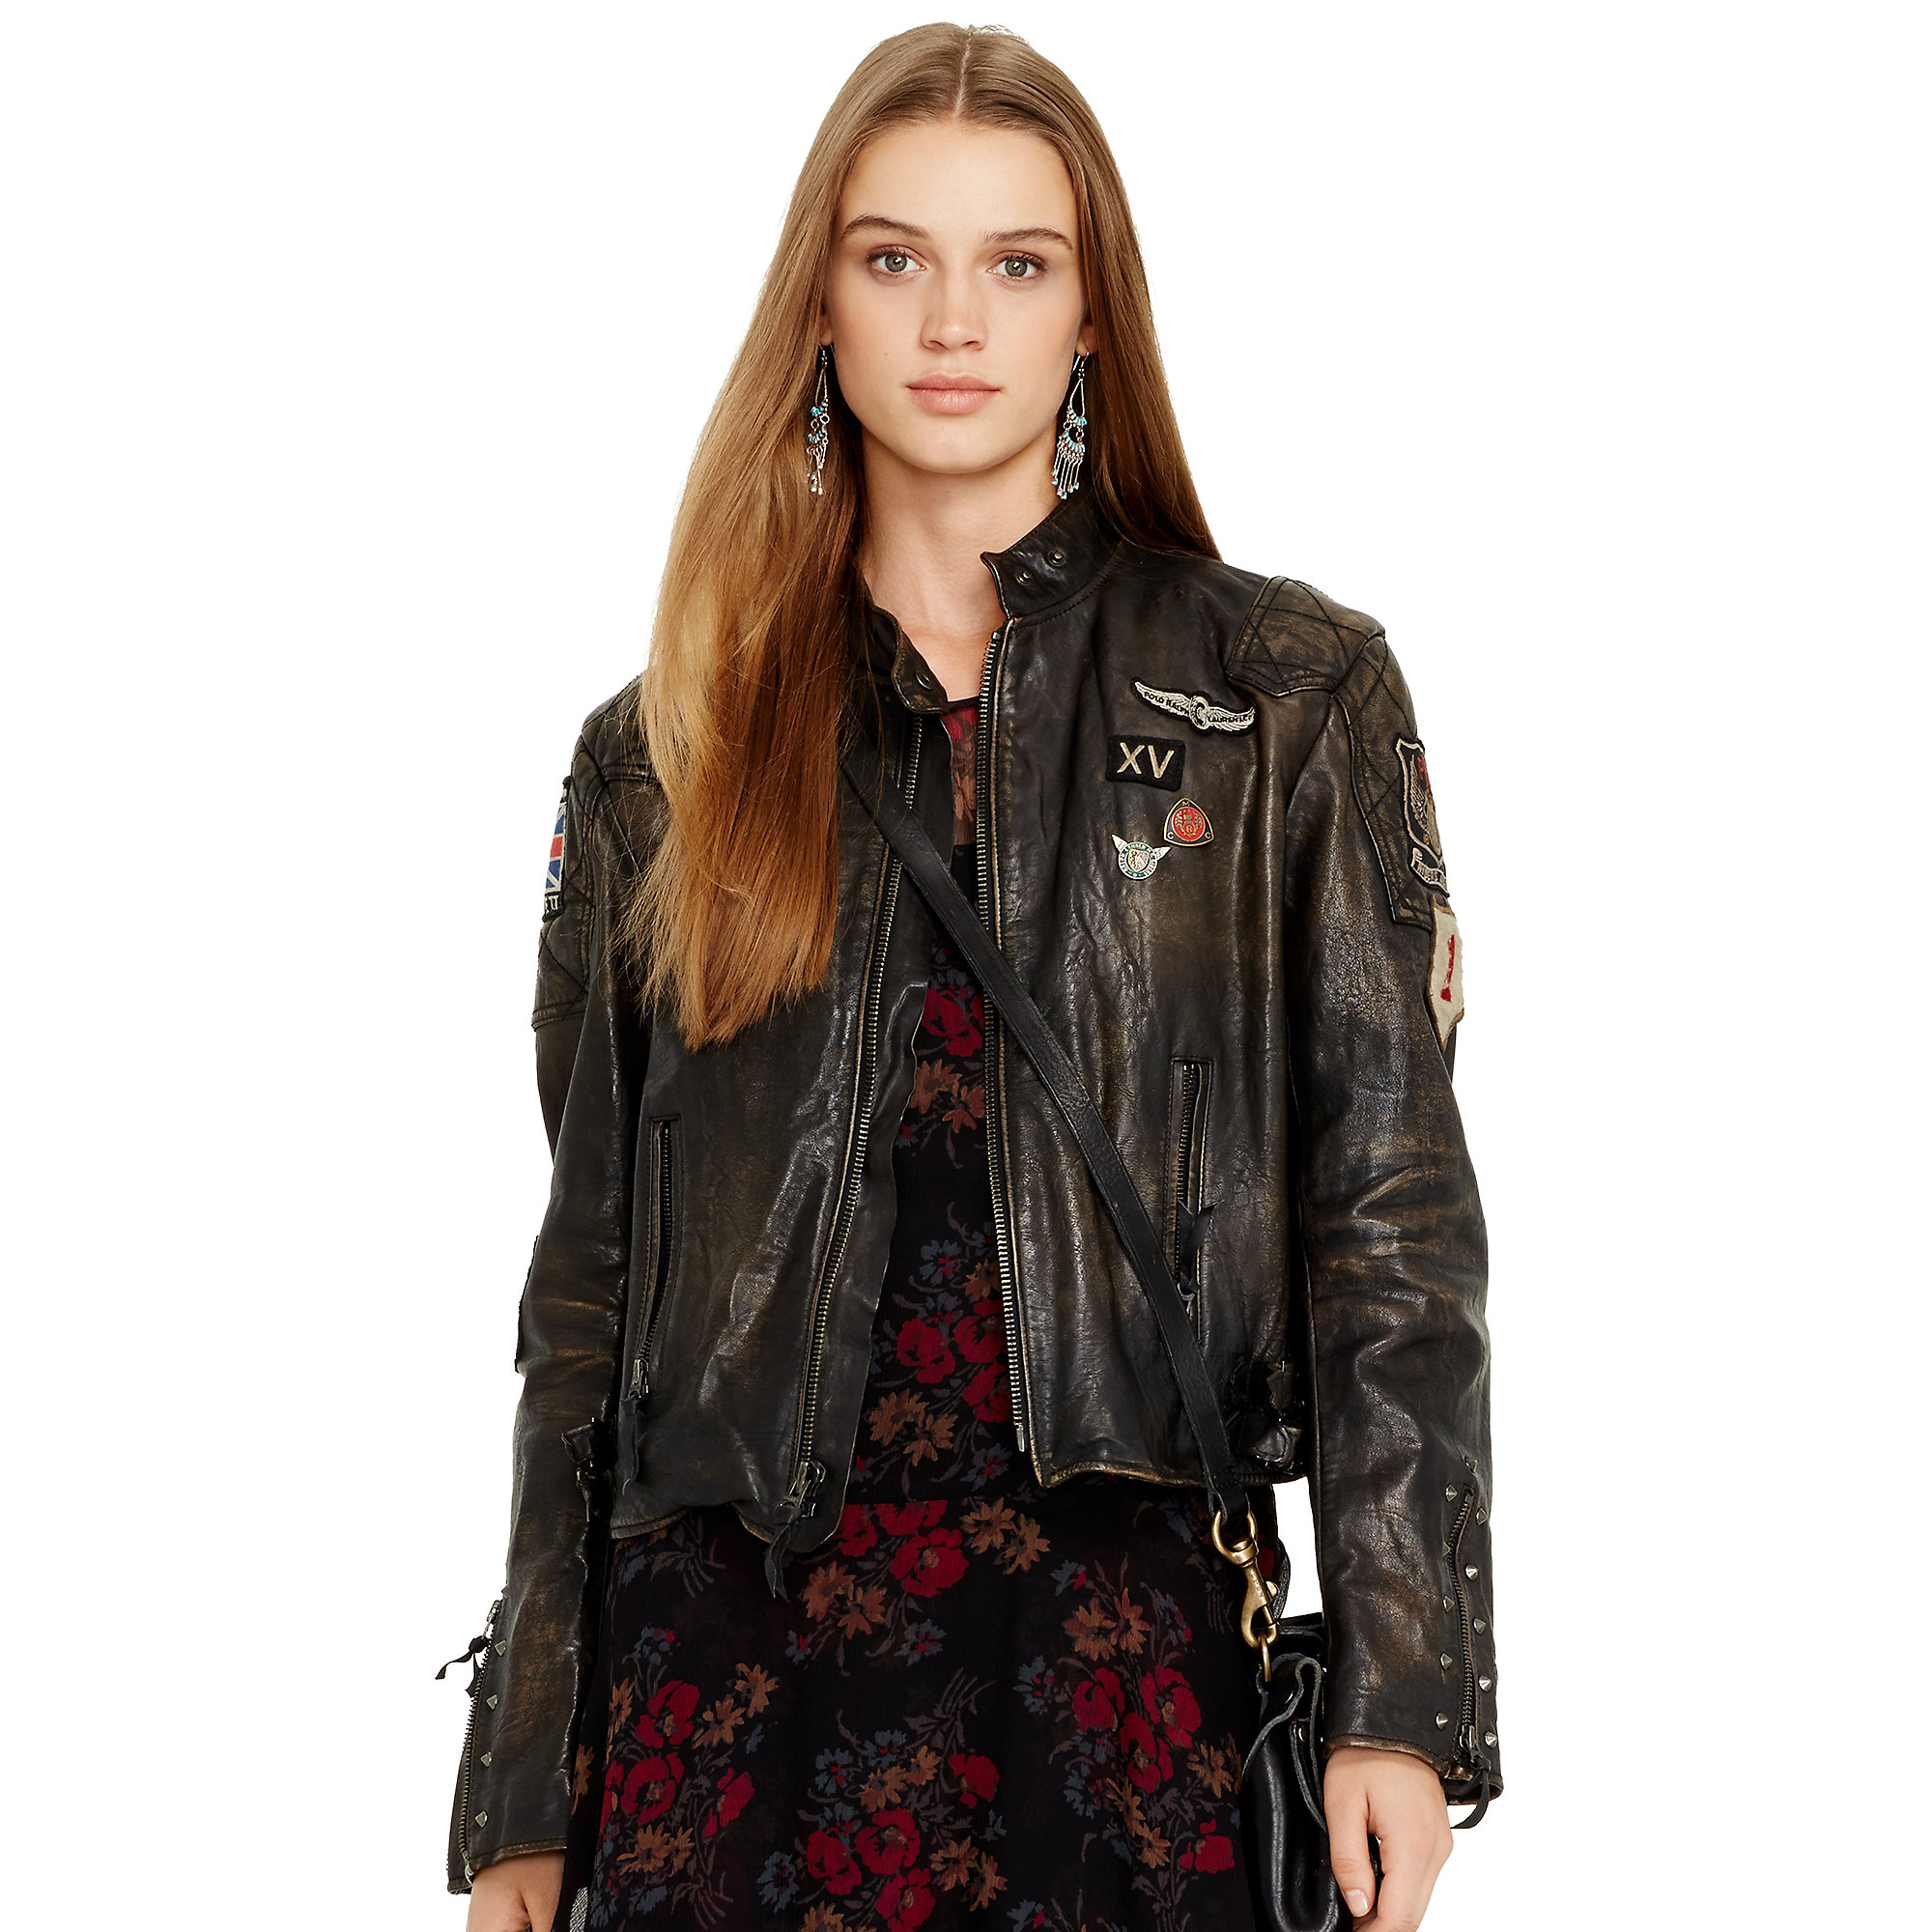 Lyst - Polo Ralph Lauren Distressed Leather Moto Jacket in Black